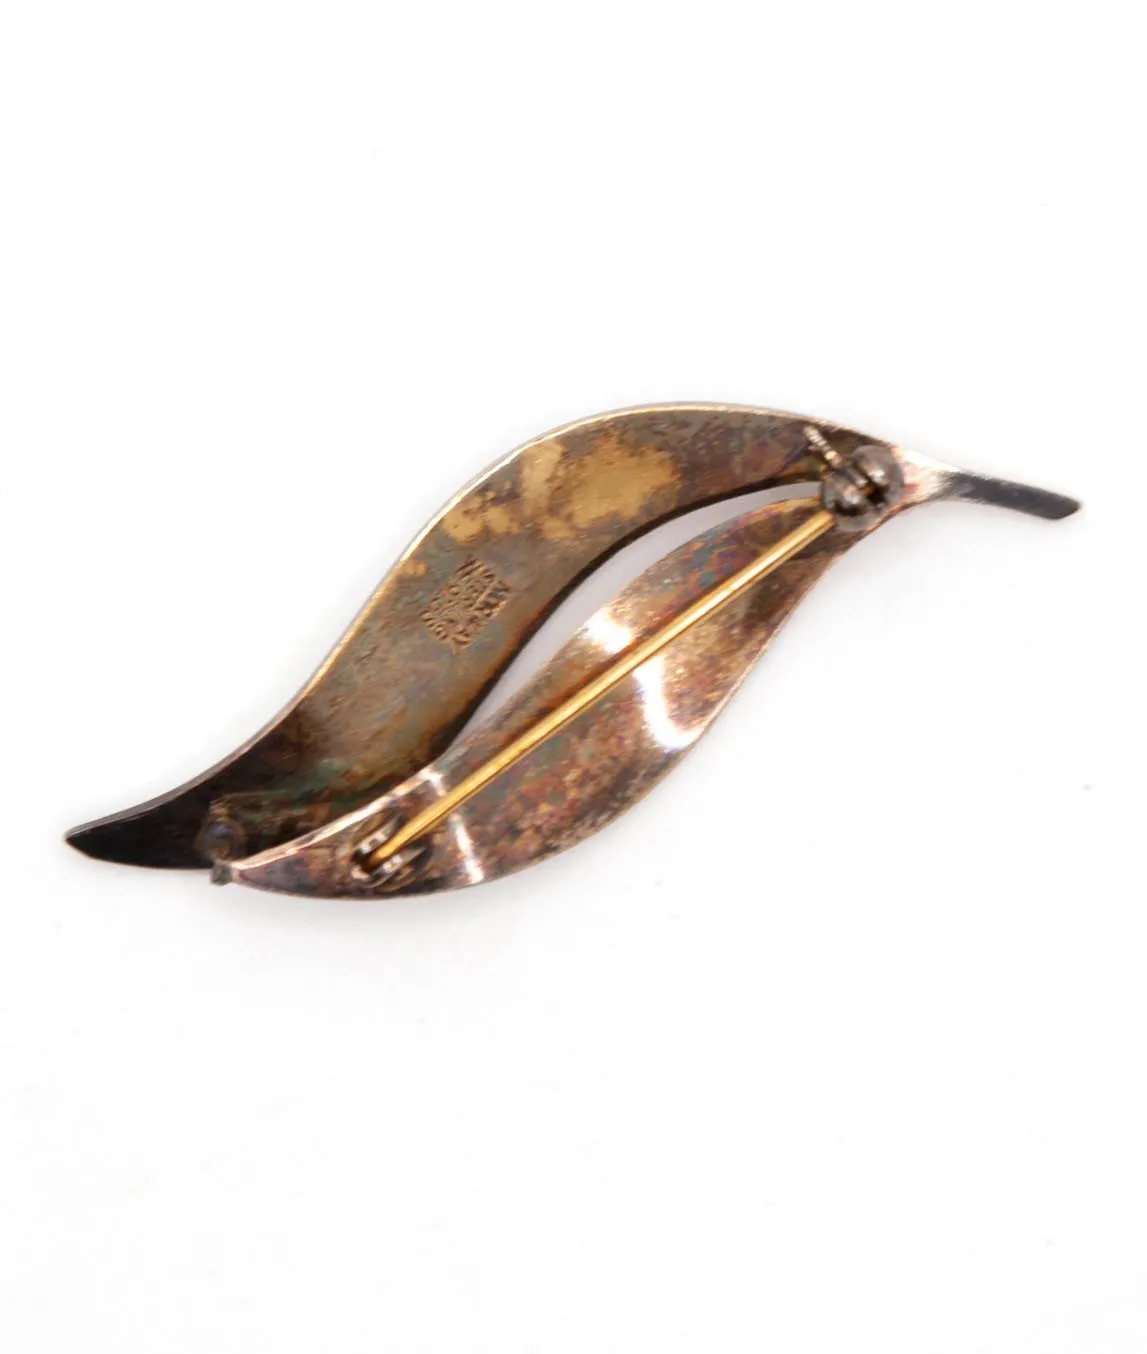 Back of Aksel Holmsen double leaf brooch with copper tone